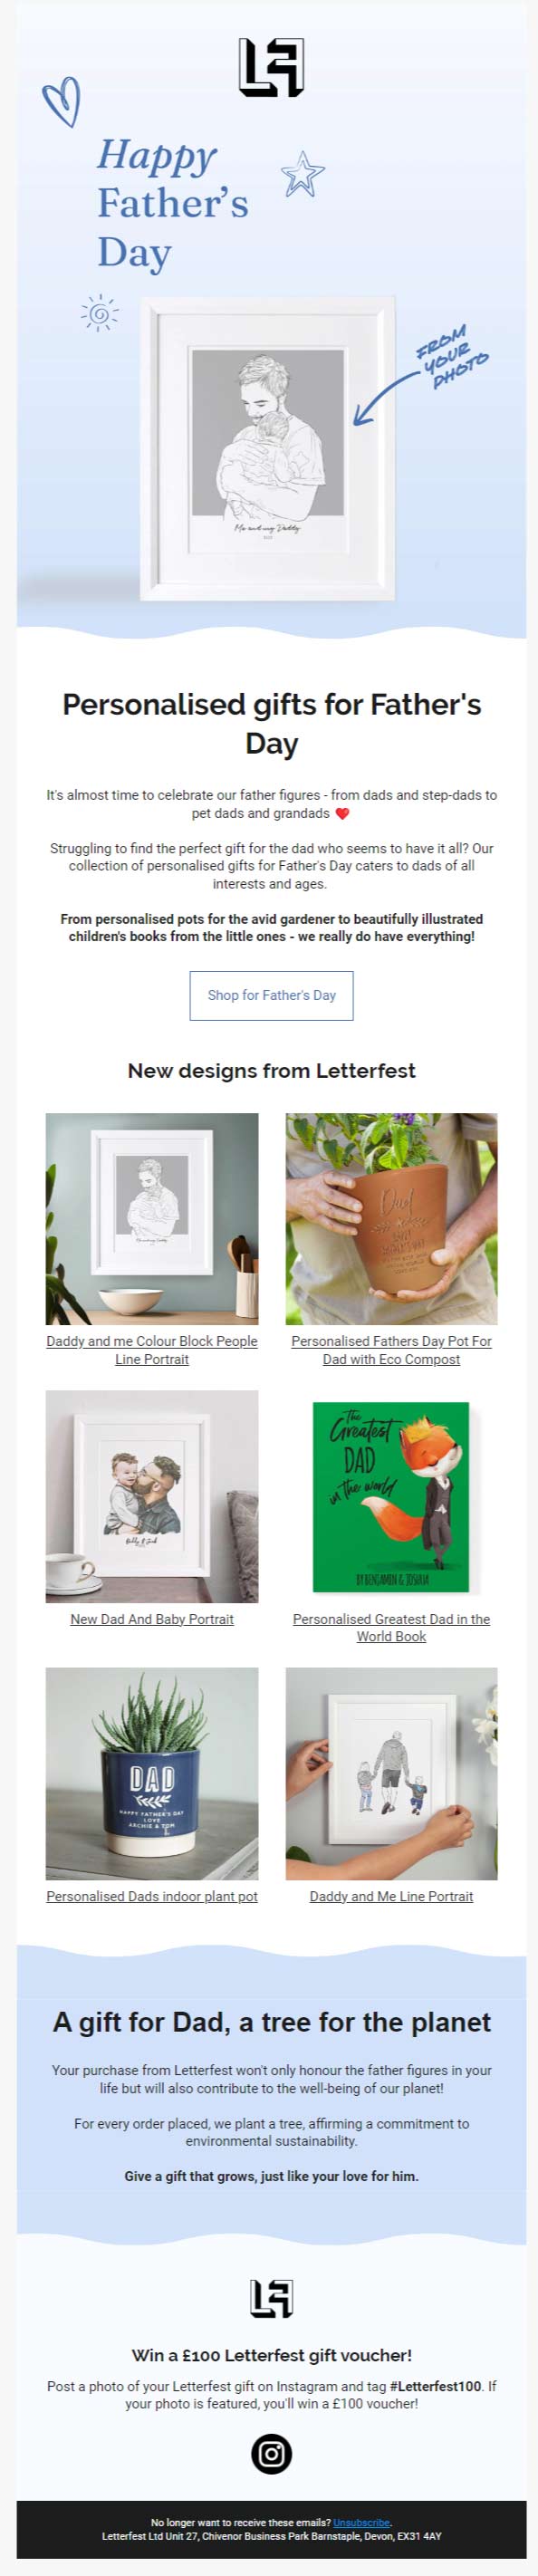 Letterfest’s Father’s Day email